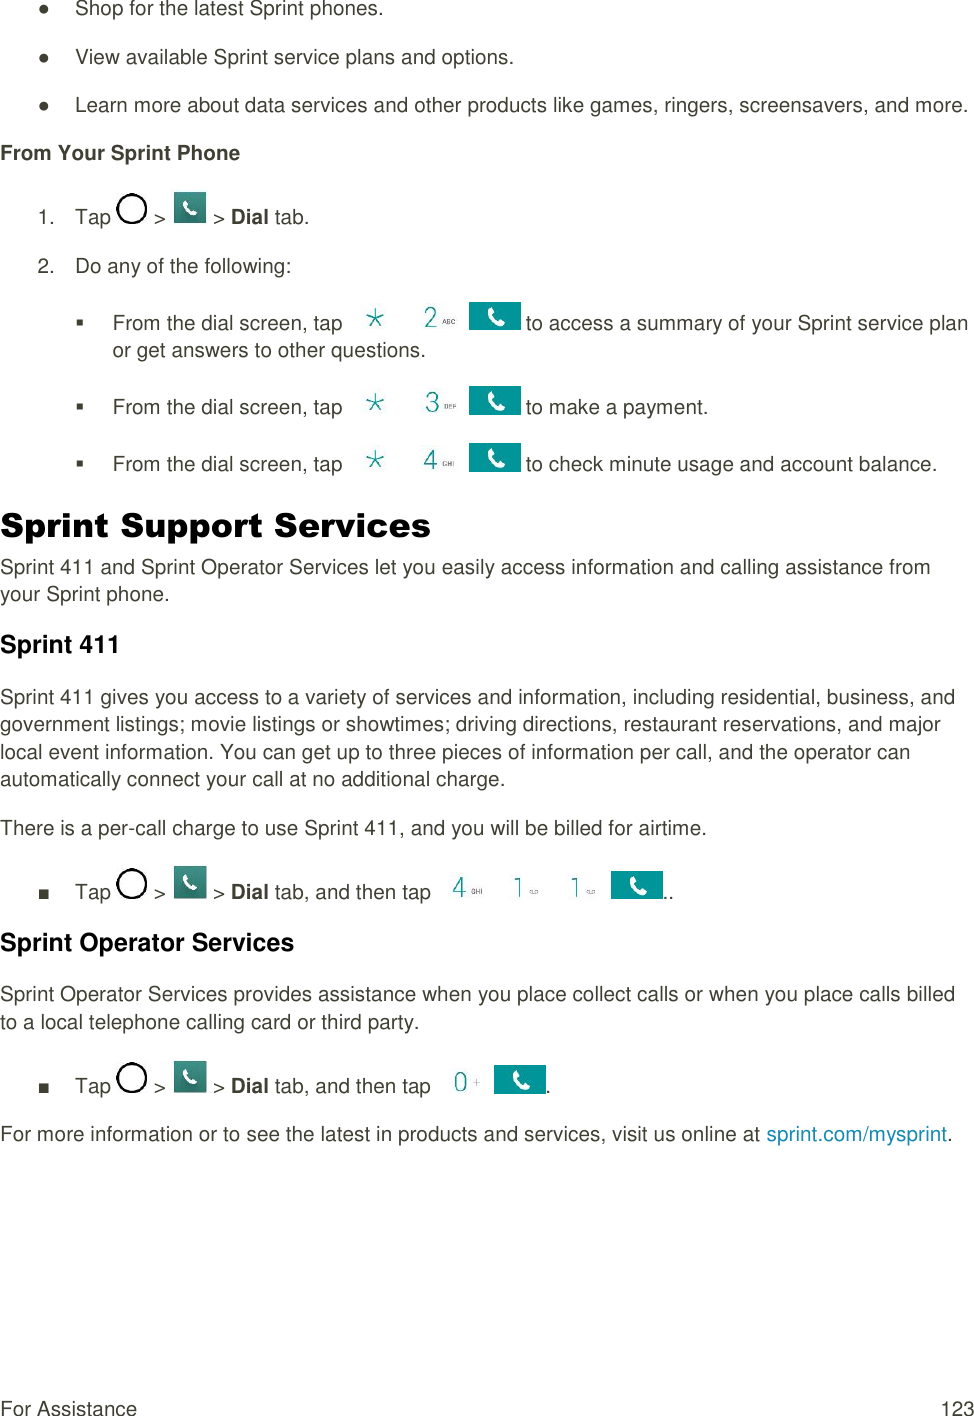 For Assistance  123 ●  Shop for the latest Sprint phones. ●  View available Sprint service plans and options. ●  Learn more about data services and other products like games, ringers, screensavers, and more. From Your Sprint Phone 1.  Tap   &gt;   &gt; Dial tab.  2.  Do any of the following:    From the dial screen, tap       to access a summary of your Sprint service plan or get answers to other questions.   From the dial screen, tap       to make a payment.   From the dial screen, tap       to check minute usage and account balance. Sprint Support Services Sprint 411 and Sprint Operator Services let you easily access information and calling assistance from your Sprint phone. Sprint 411 Sprint 411 gives you access to a variety of services and information, including residential, business, and government listings; movie listings or showtimes; driving directions, restaurant reservations, and major local event information. You can get up to three pieces of information per call, and the operator can automatically connect your call at no additional charge. There is a per-call charge to use Sprint 411, and you will be billed for airtime. ■  Tap   &gt;   &gt; Dial tab, and then tap        .. Sprint Operator Services Sprint Operator Services provides assistance when you place collect calls or when you place calls billed to a local telephone calling card or third party. ■  Tap   &gt;   &gt; Dial tab, and then tap    . For more information or to see the latest in products and services, visit us online at sprint.com/mysprint.   